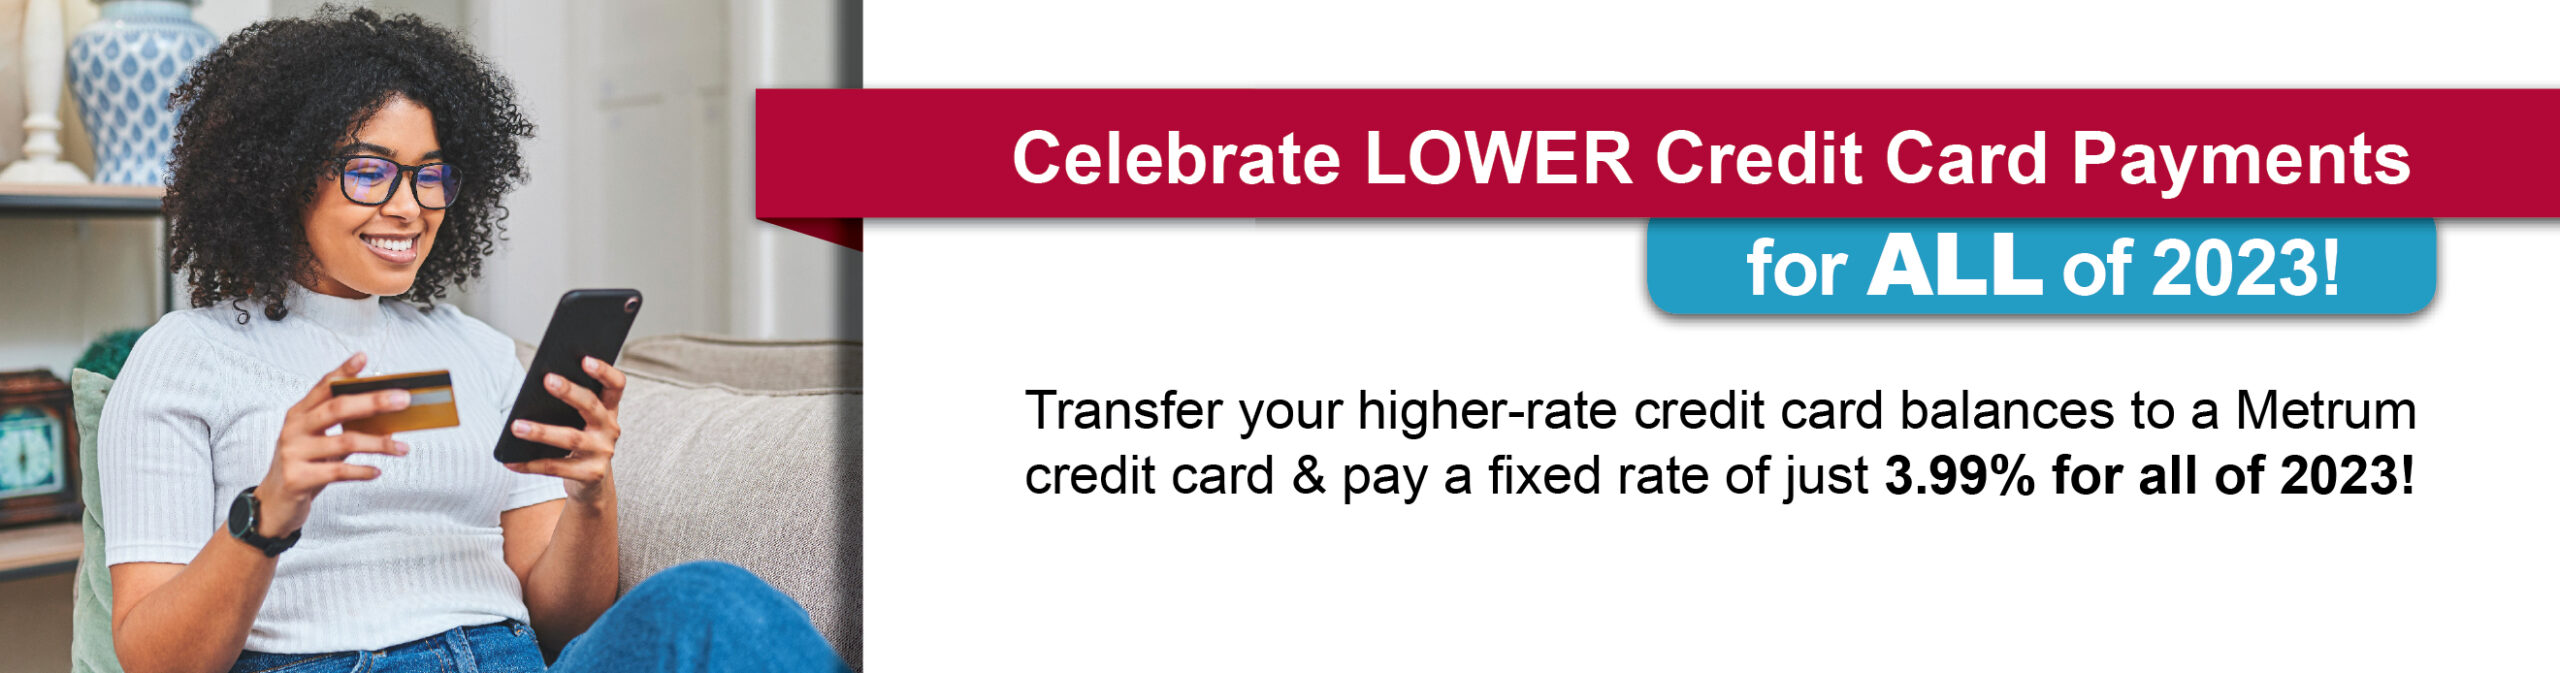 Banner image showing a reason to celebrate lower credit card payments for all of 2023.